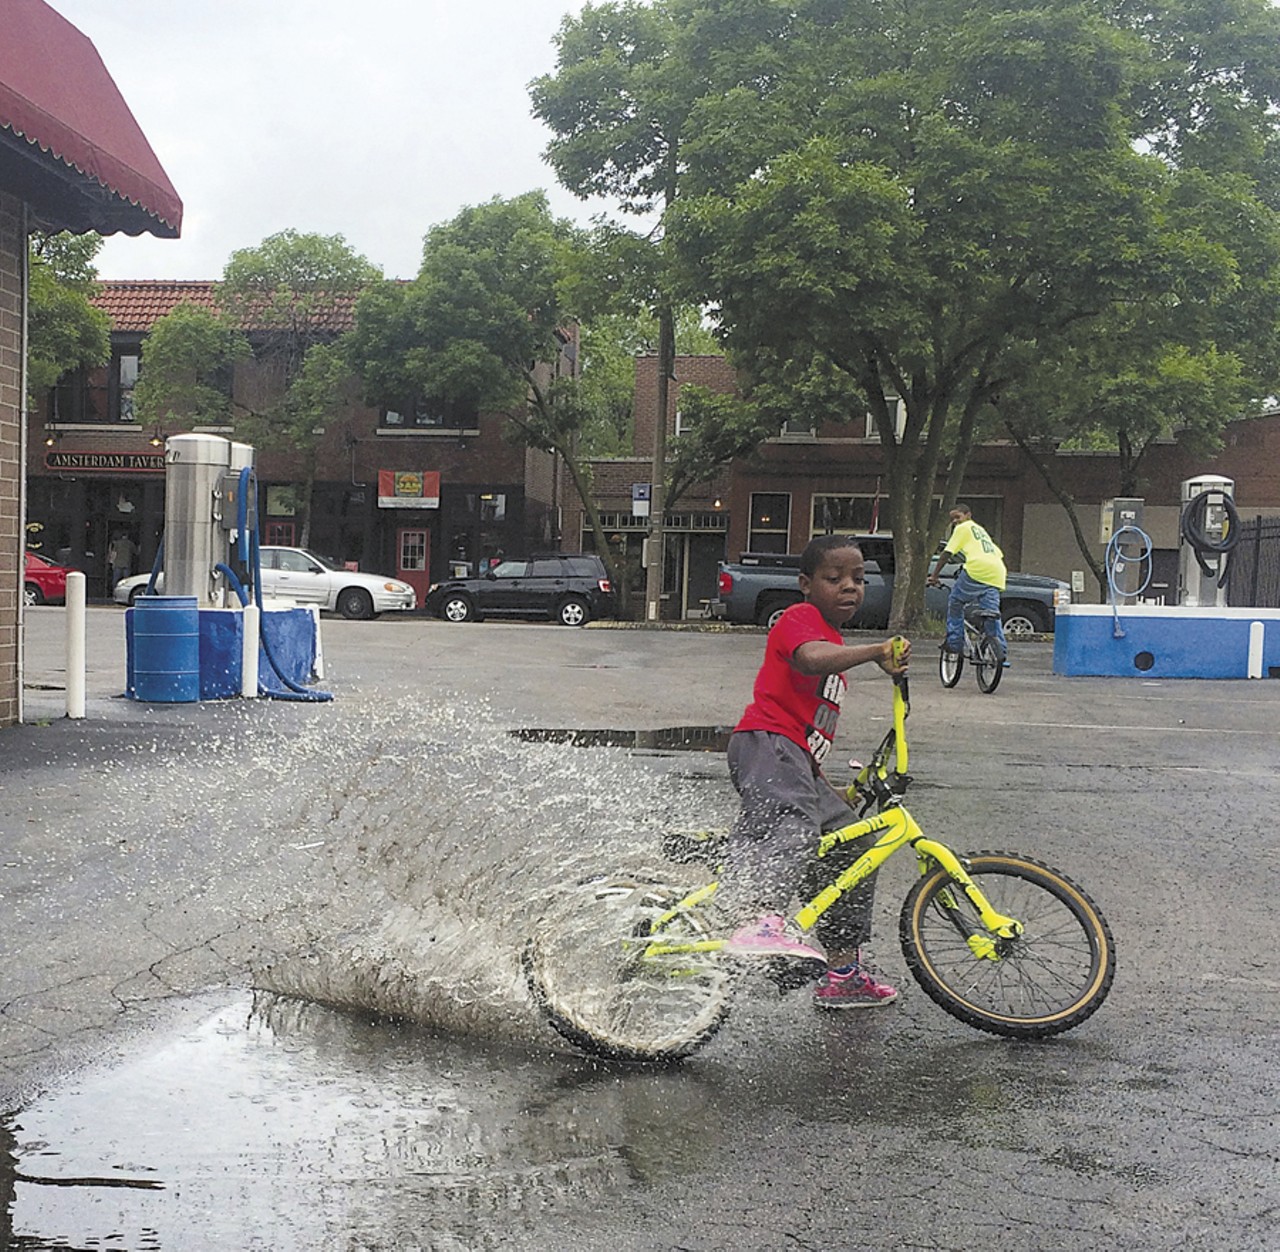 &#147;Look us up, we&#146;re called the Biking Movement.&#148; &#151; Marquis, tearing through puddles on Morgan Ford Road, May 8.